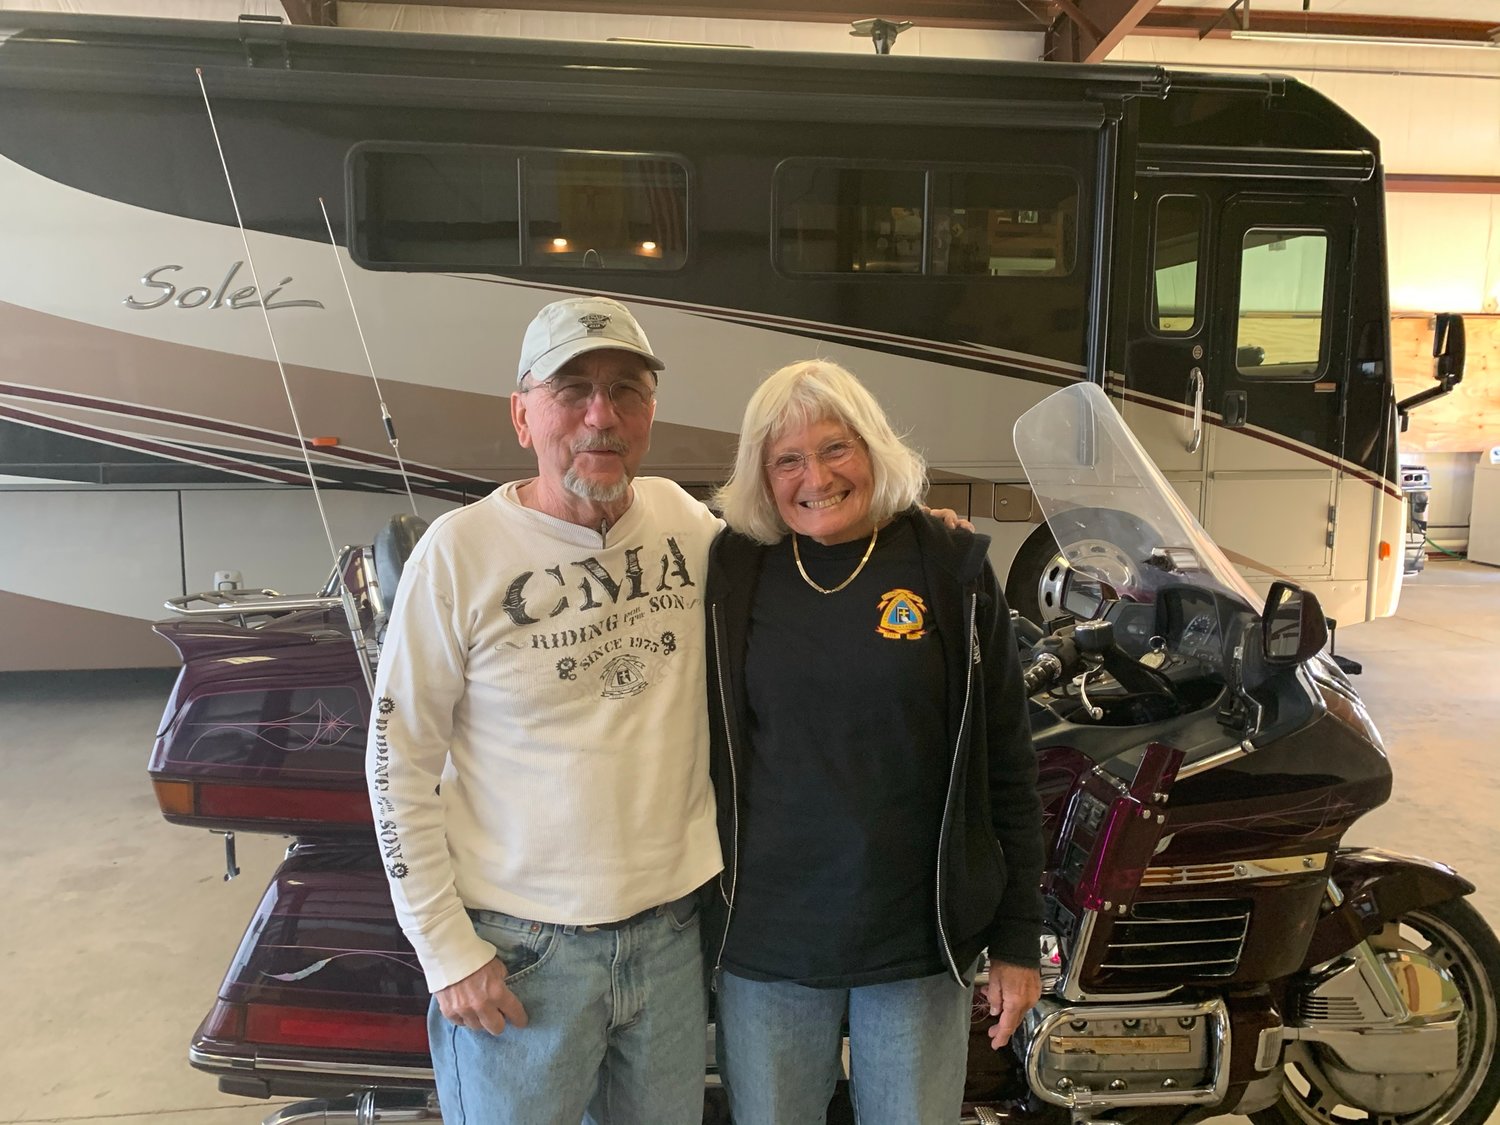 Tommy and Kathy Tucker at their new home in Mimbres where their RV and motorcycle fit into a converted airplane hangar.